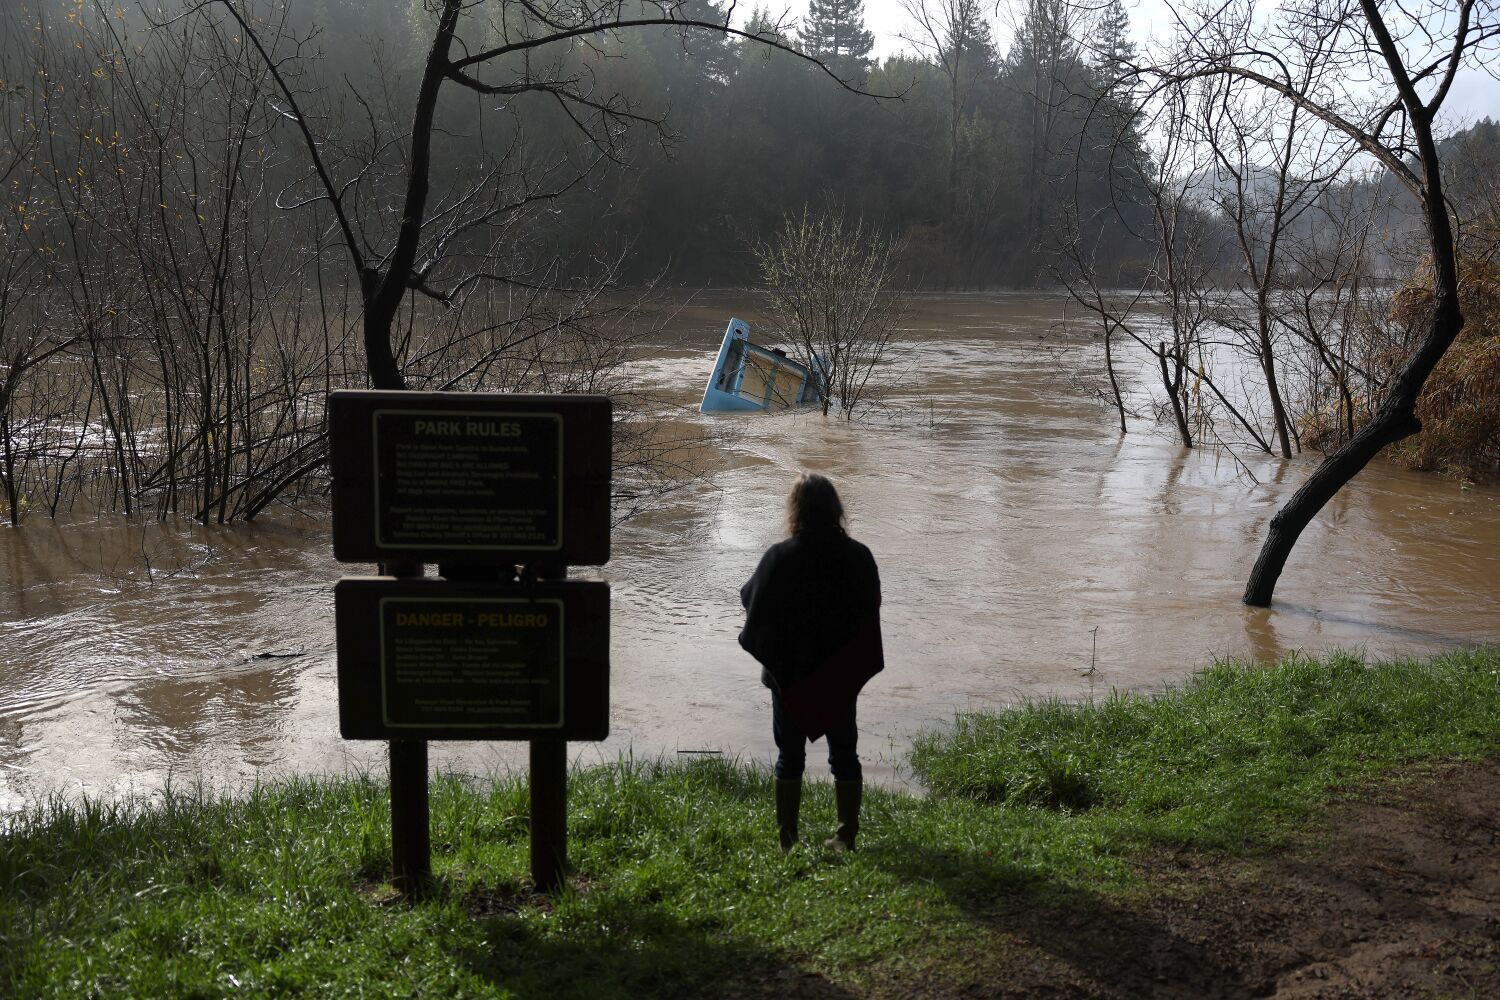 New storm could bring more peril to California rivers already hit by deadly flooding